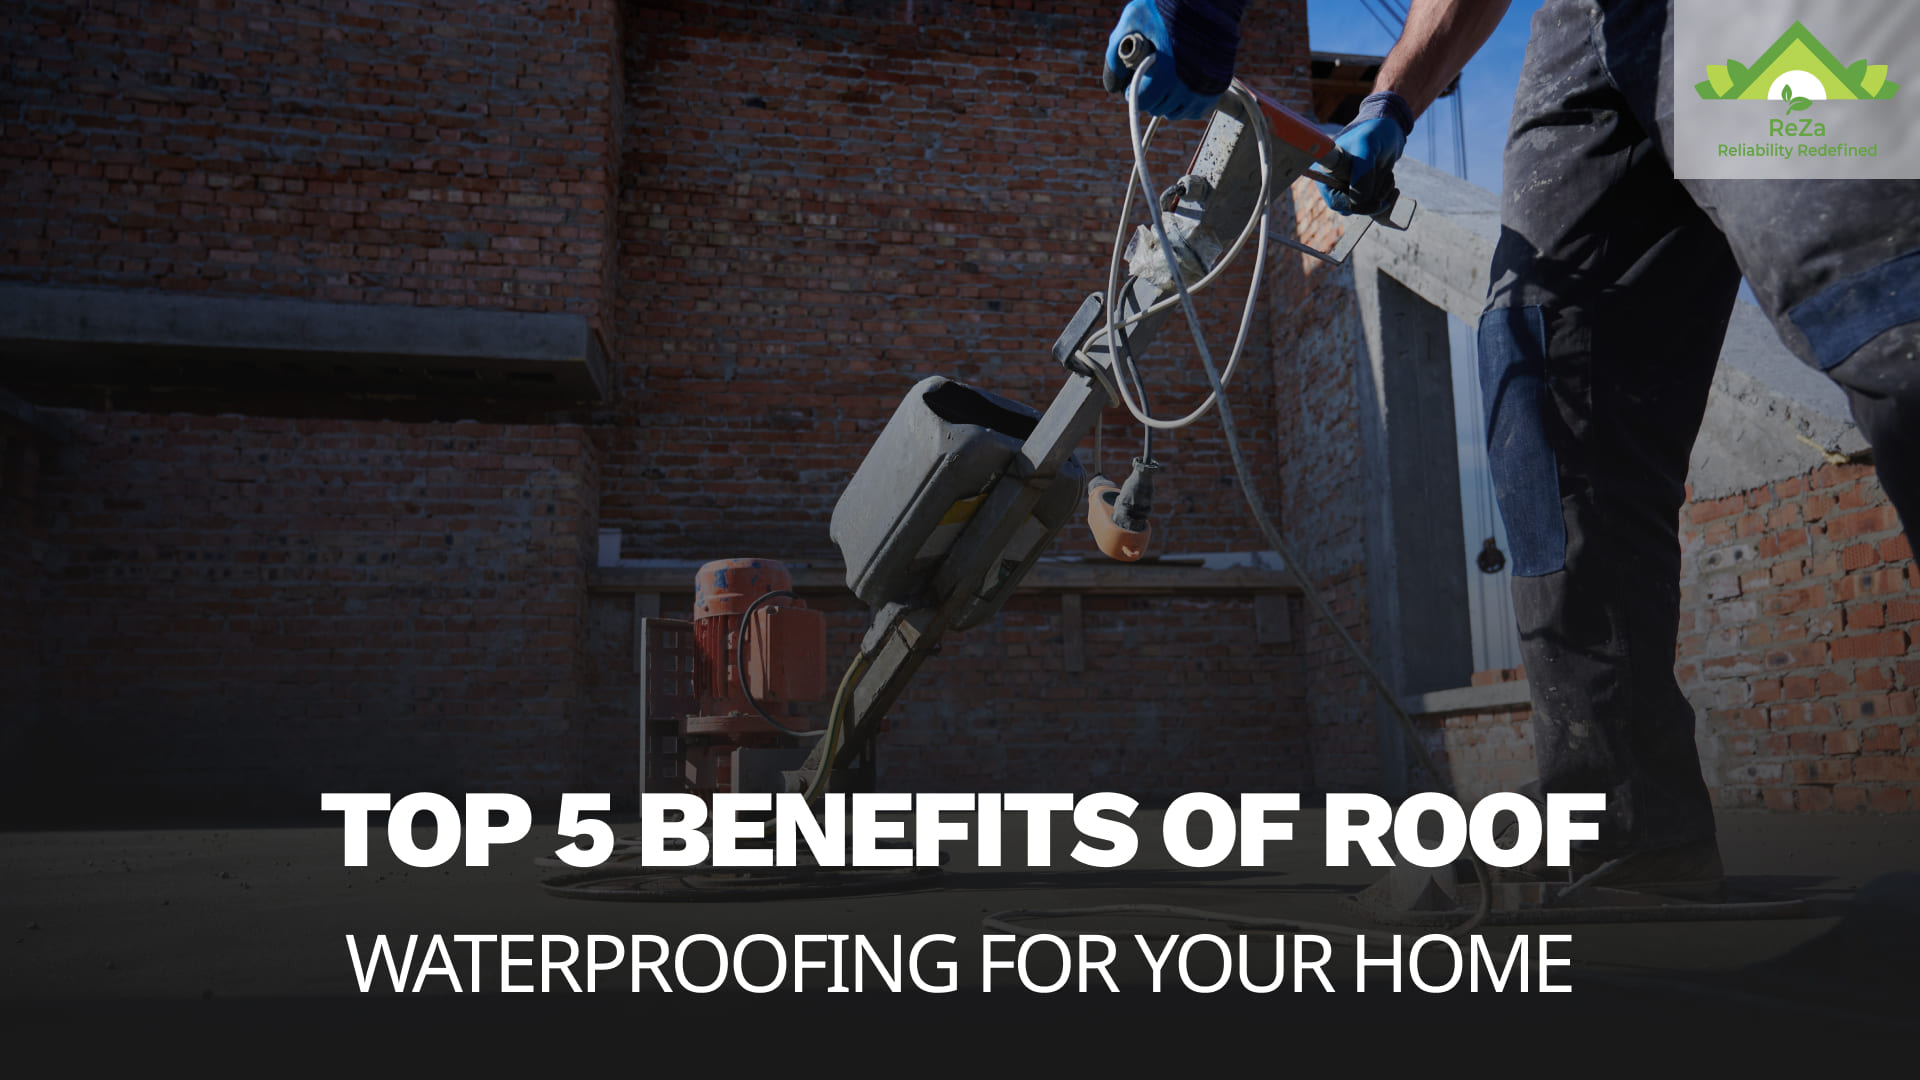 Top 5 Benefits of Roof Waterproofing for Your Home